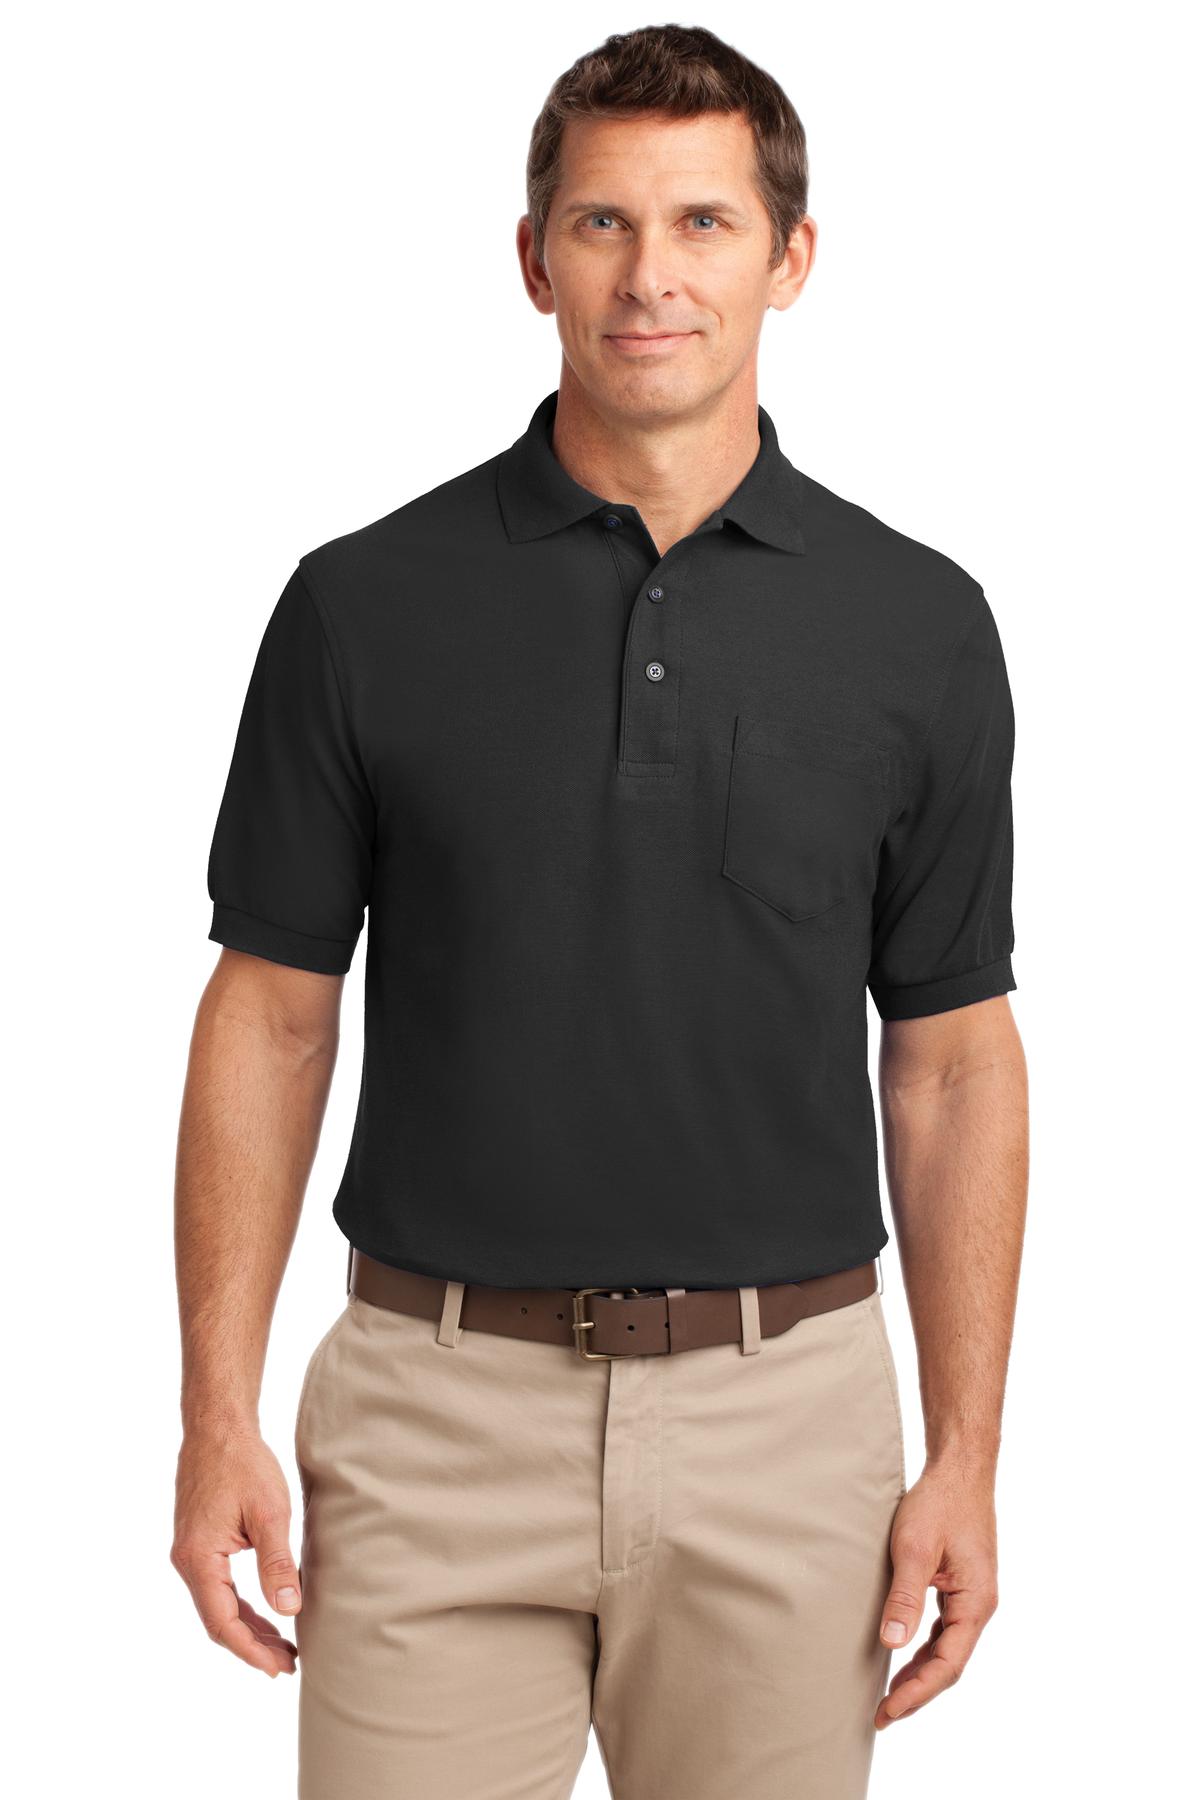 black polo business casual